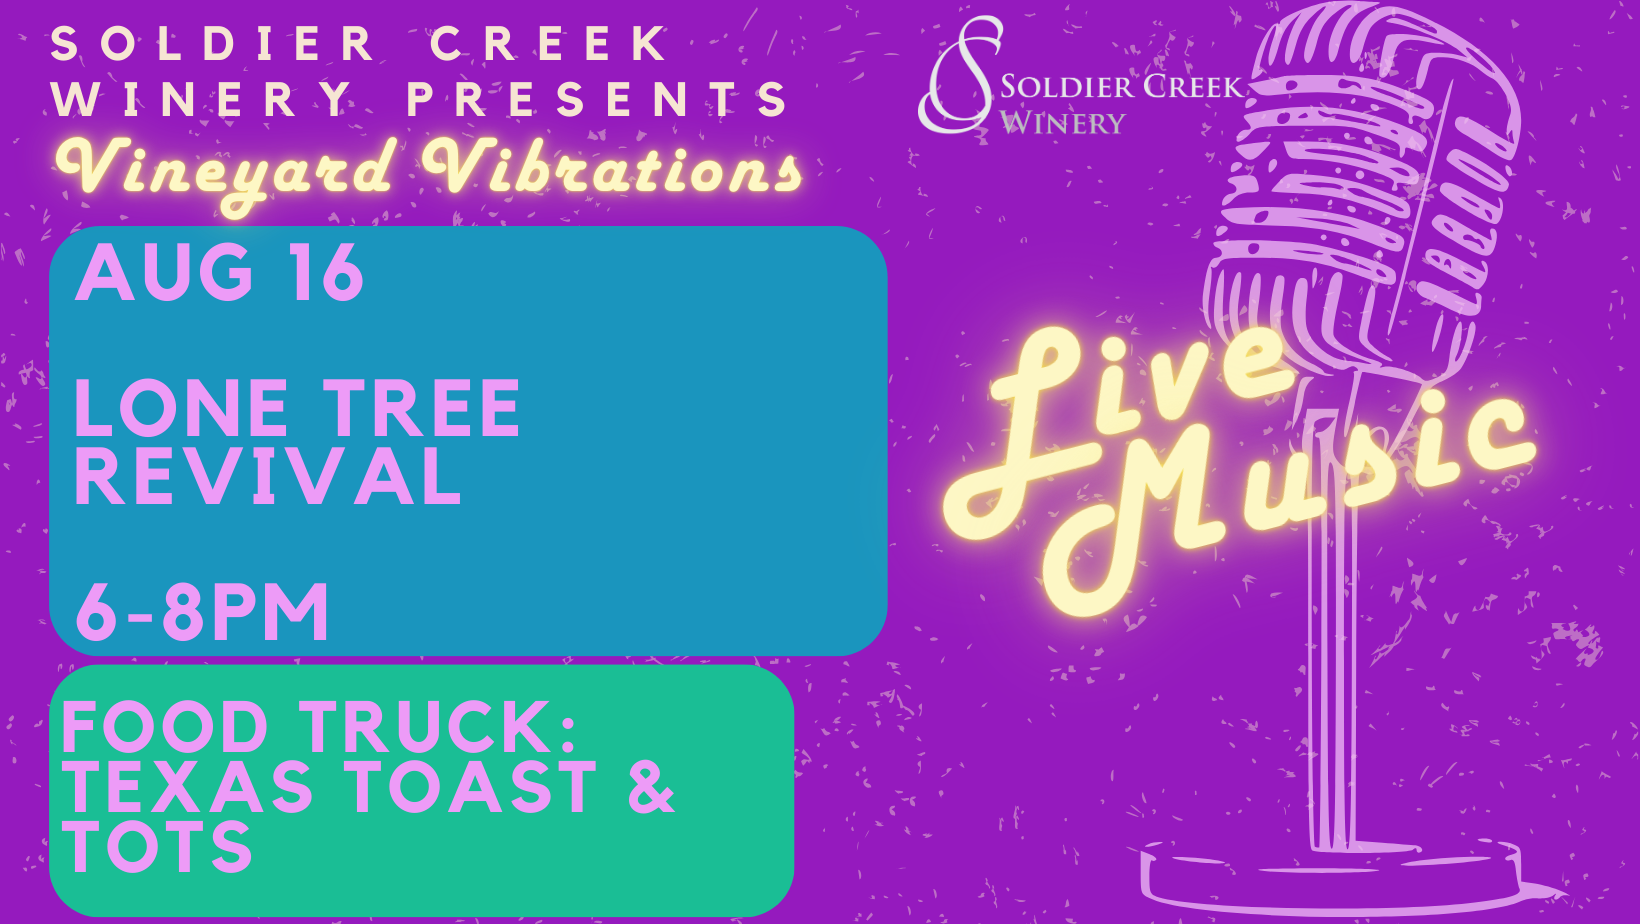 graphic depicting a microphone and neon word overlay stating "live music". words read "soldier creek winery presents vineyard vibrations, aug 16 lone tree revival 6-8pm, food truck: texas toast and tots"